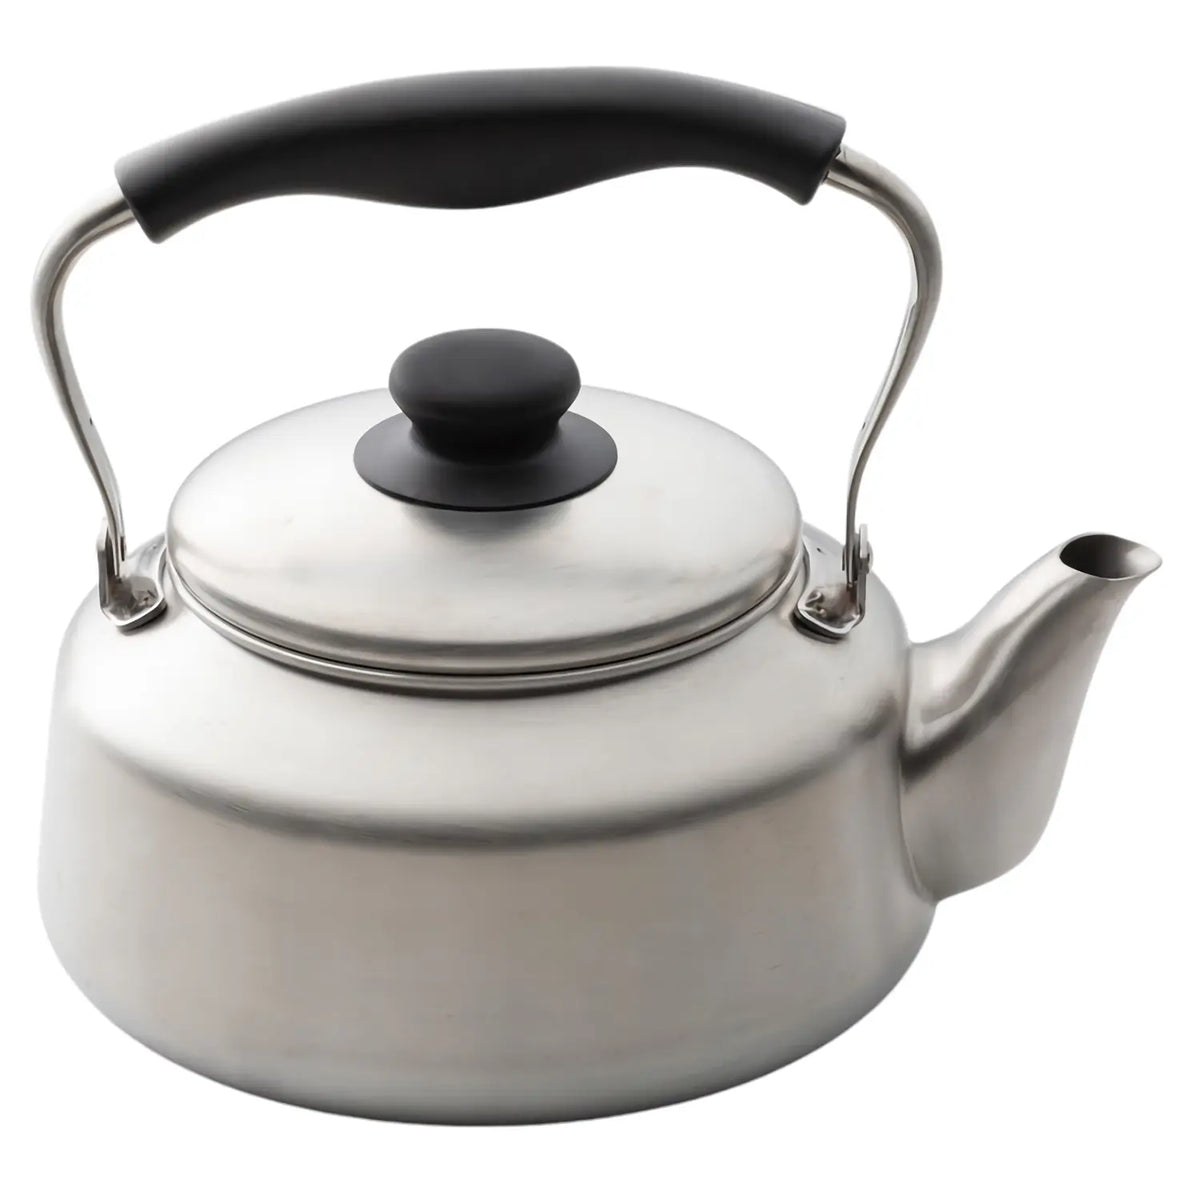 Magnetic Stainless-Steel Tea Kettle (for Induction Cooktops) from